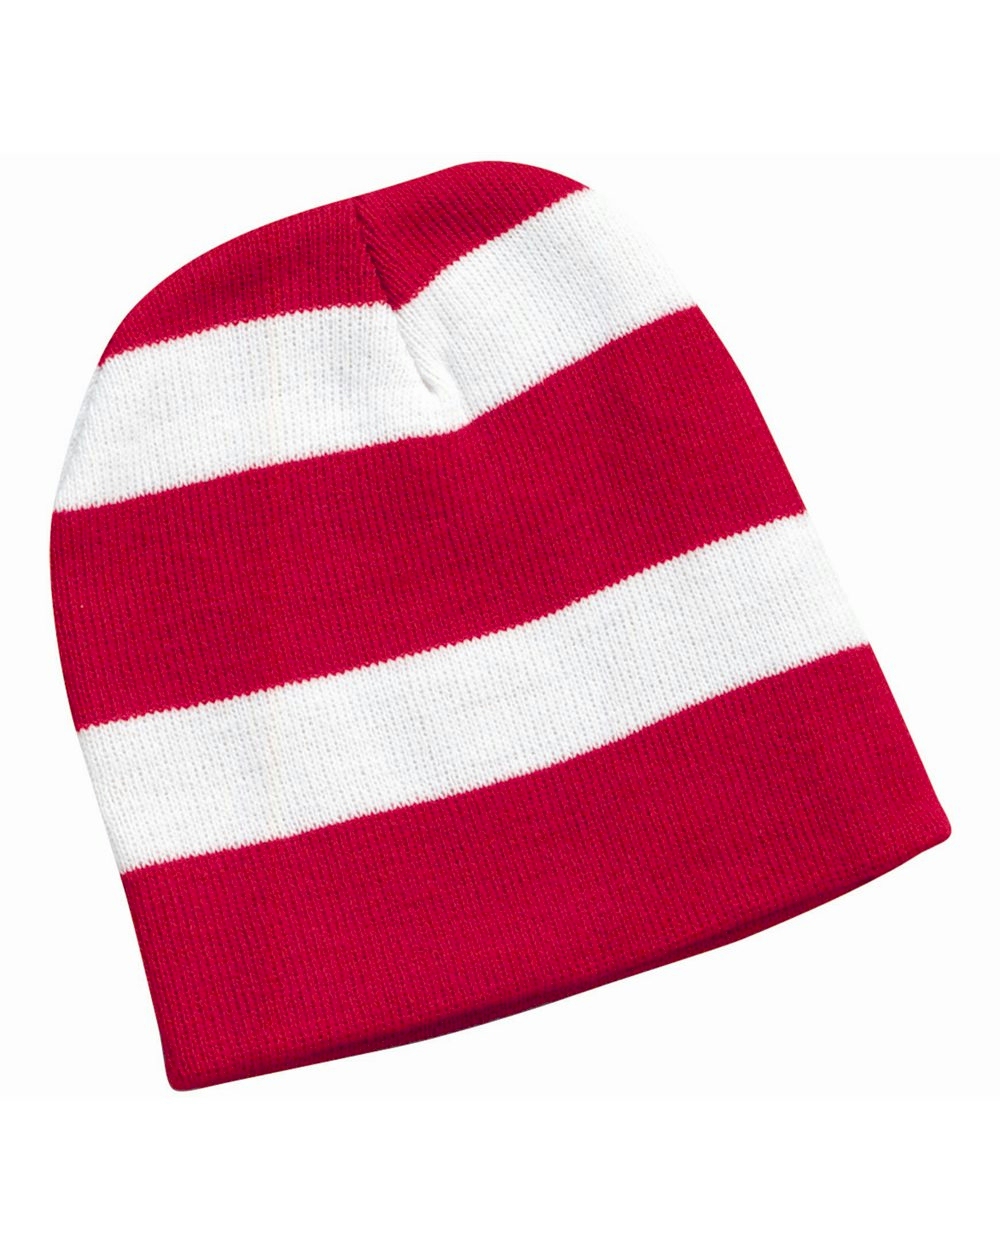 Rugby Striped Knit Beanie Embroidery Blanks - Red/White